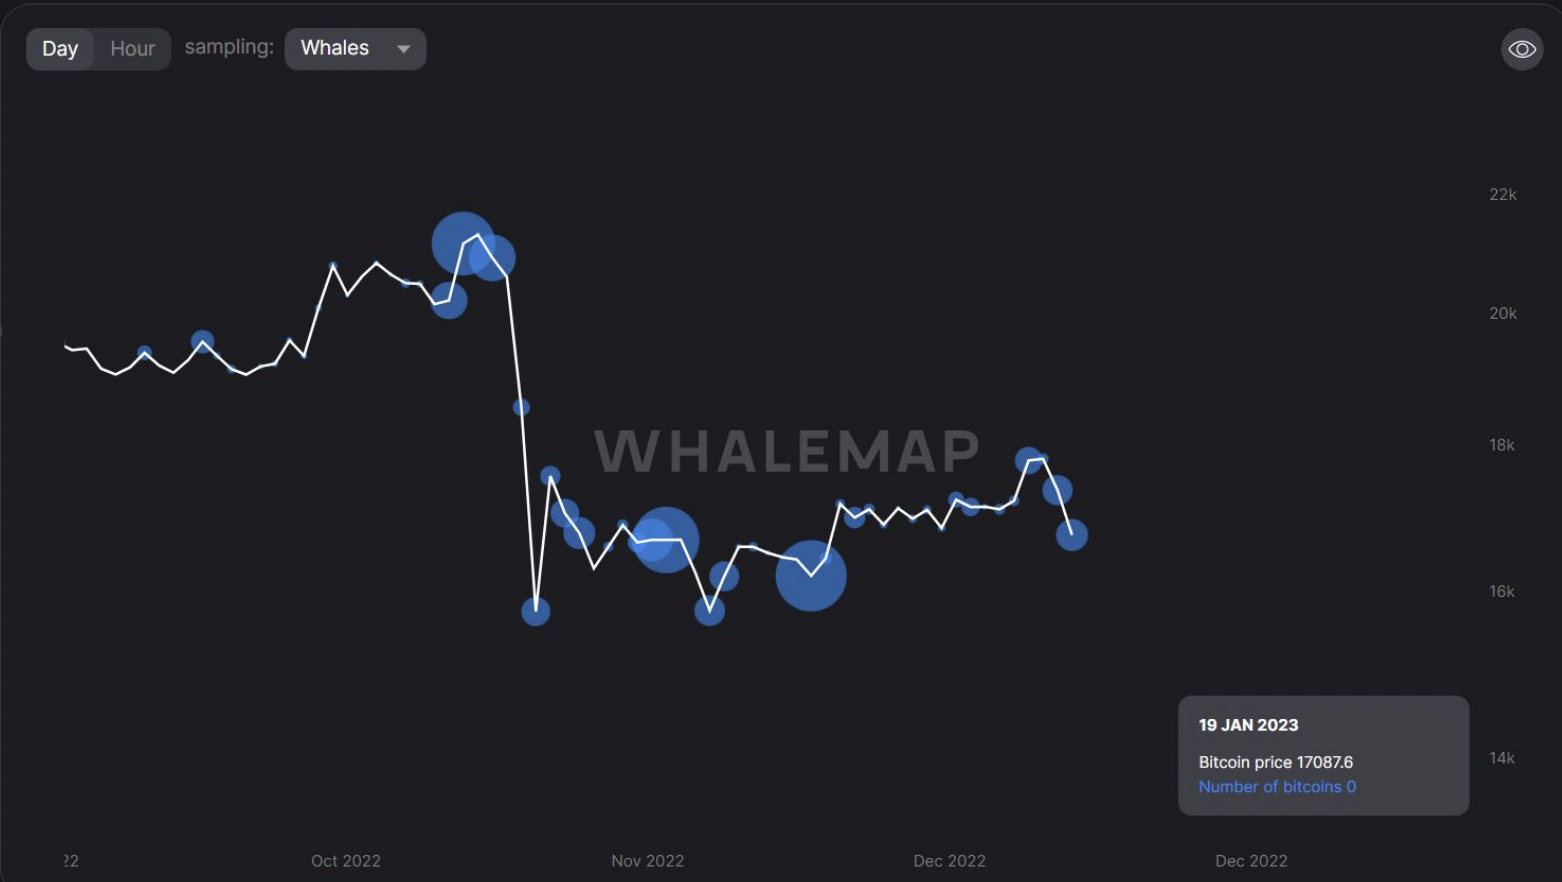 BTC accumulation by whales